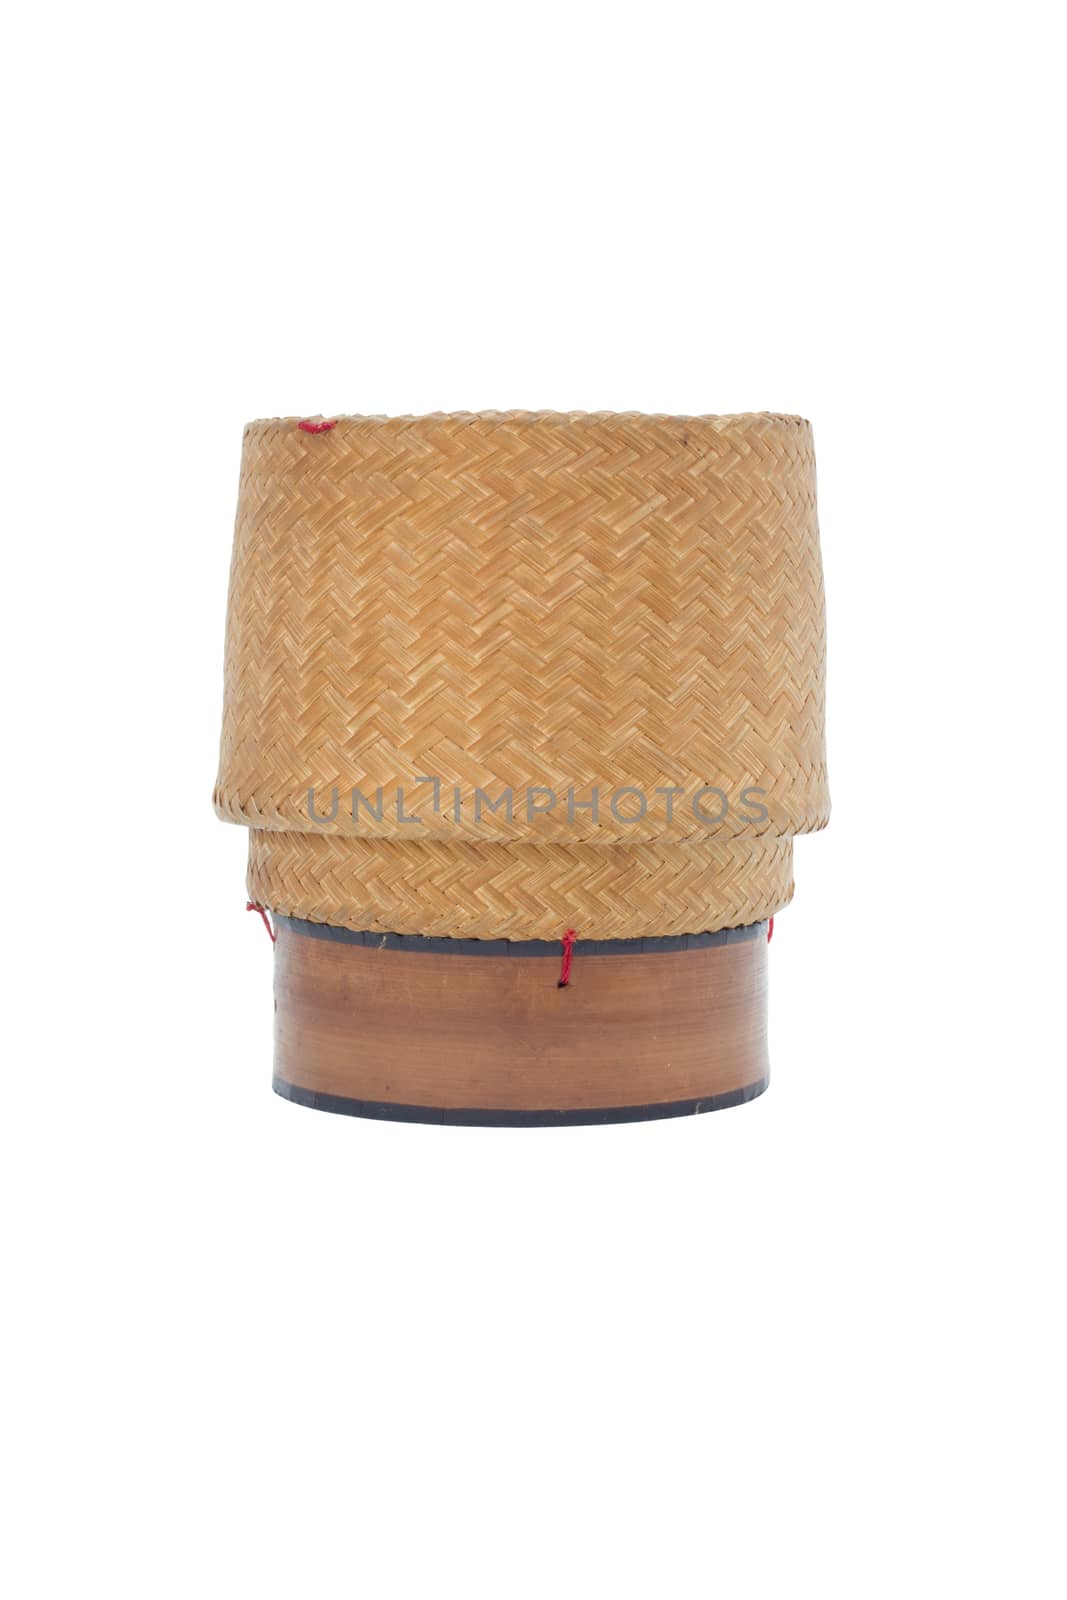 Bamboo wooden rice box in thailand, isolated on white background